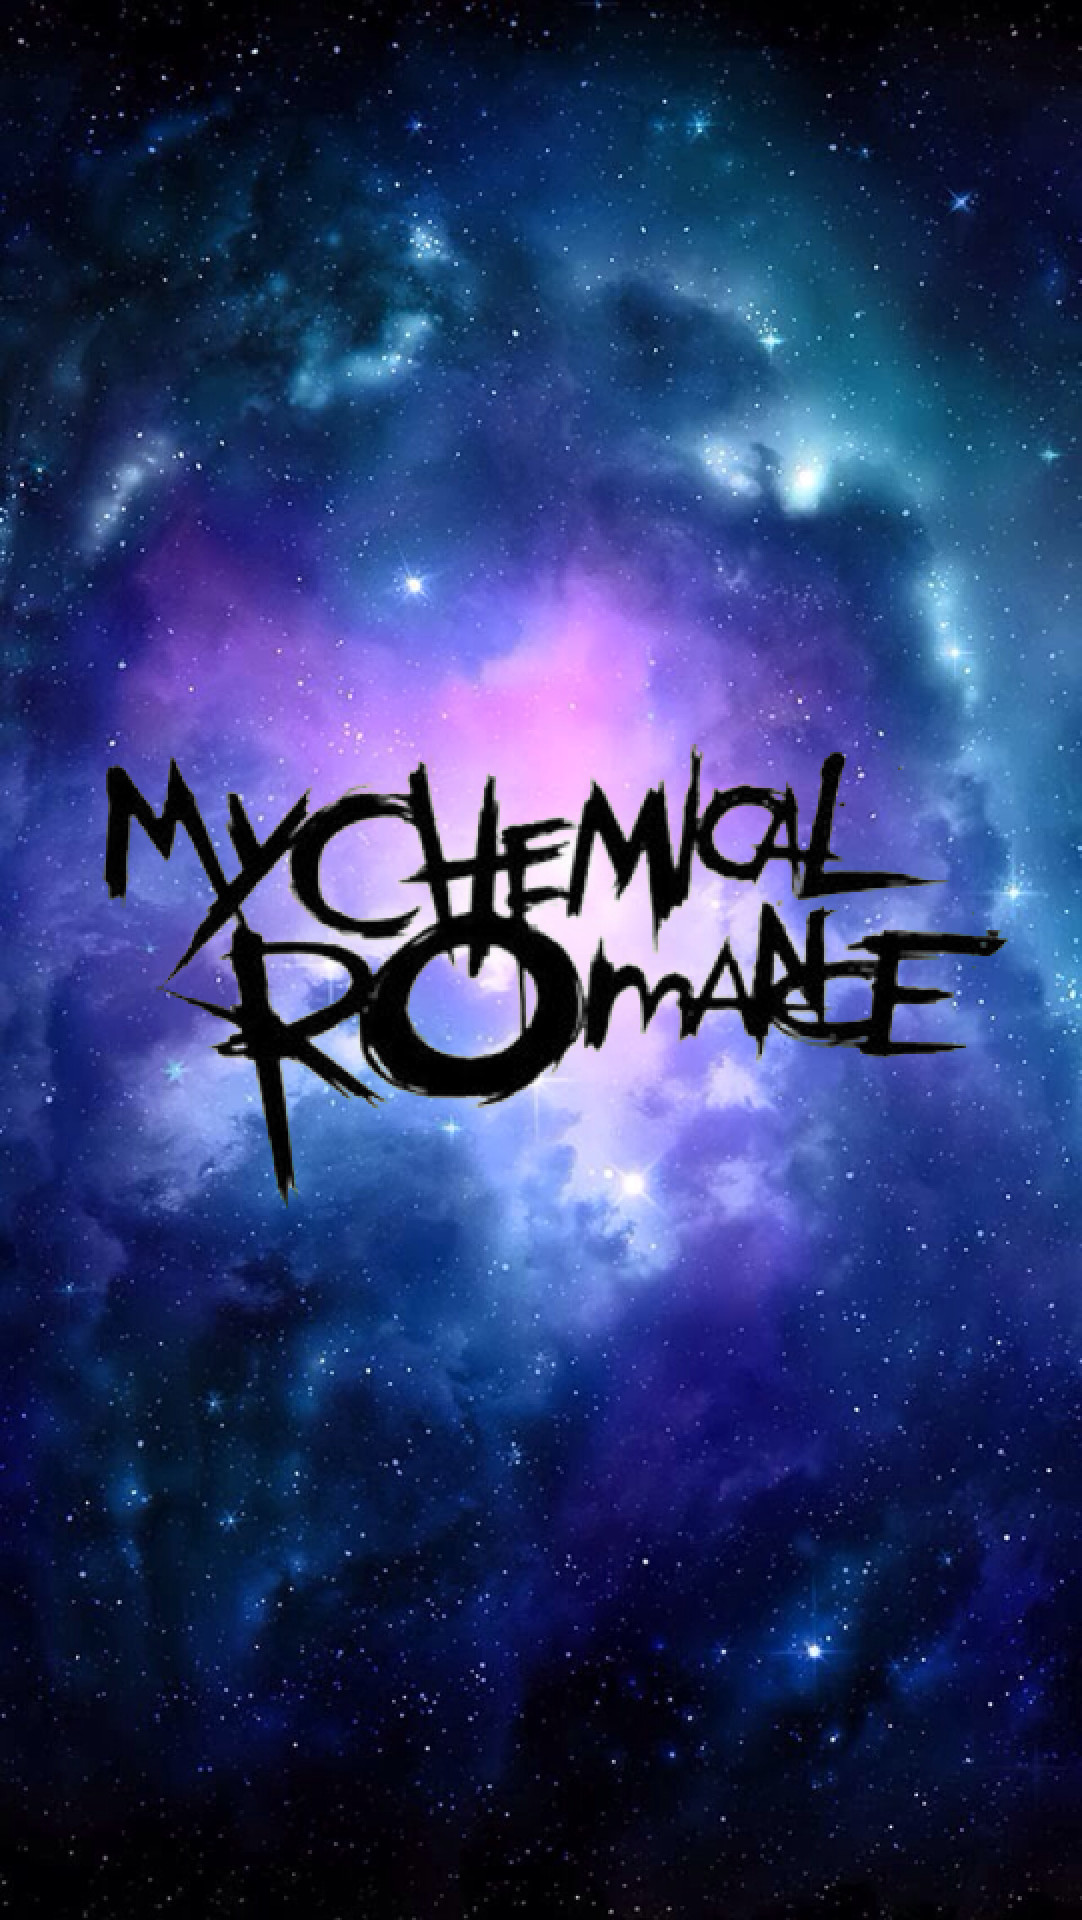 My Chemical Romance wallpaper for iPhone 5 that I made. Comment if you want  more